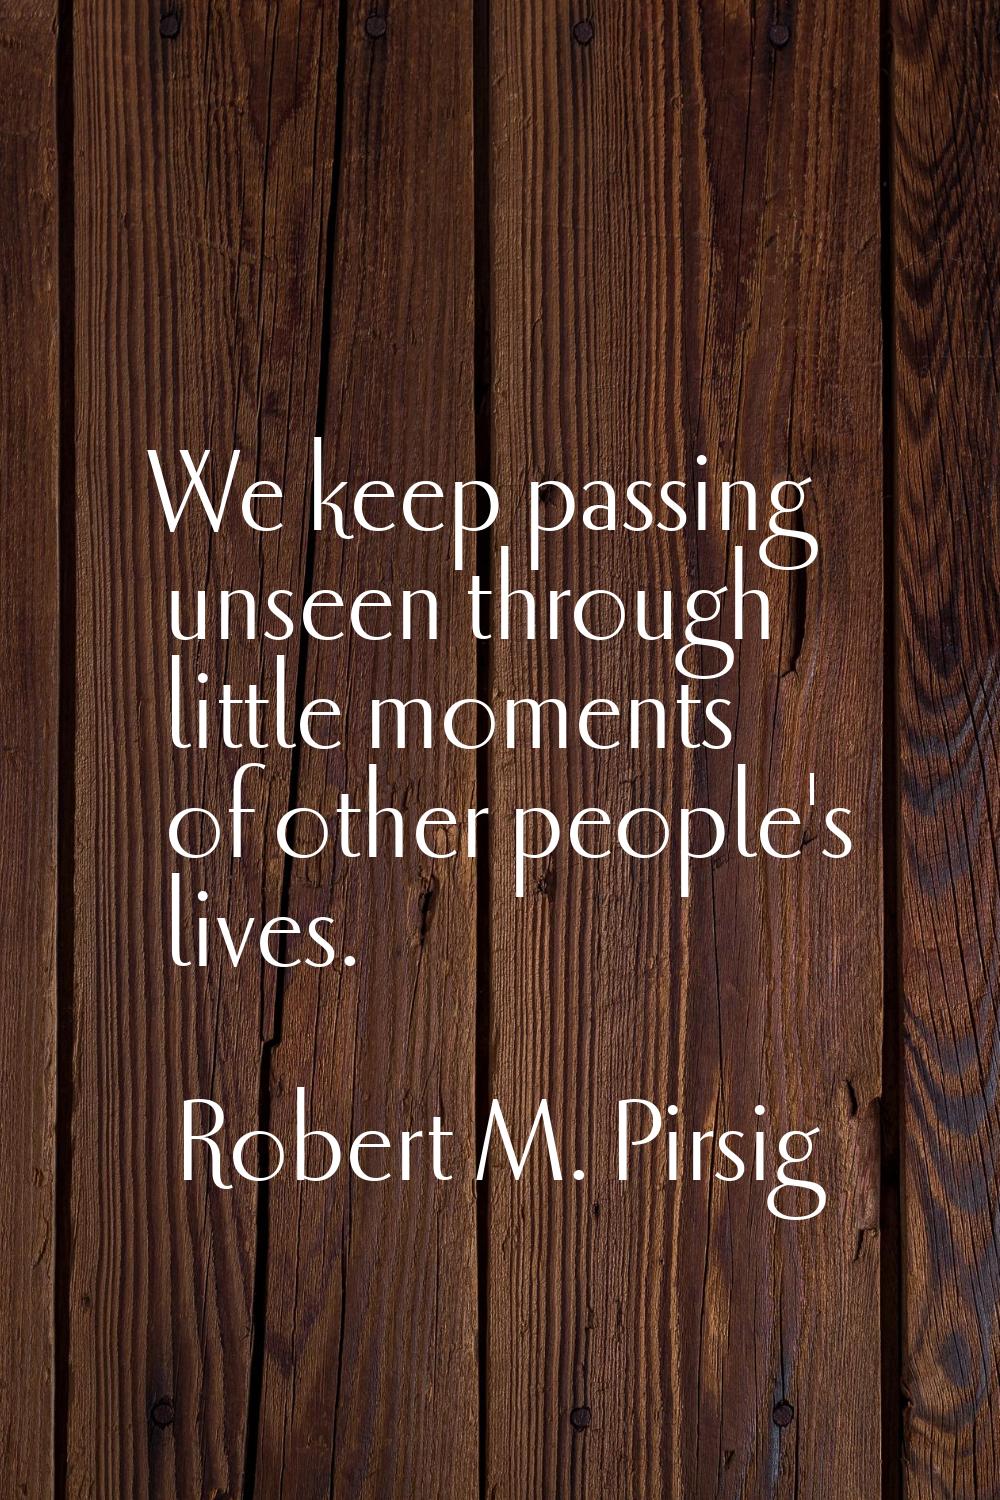 We keep passing unseen through little moments of other people's lives.